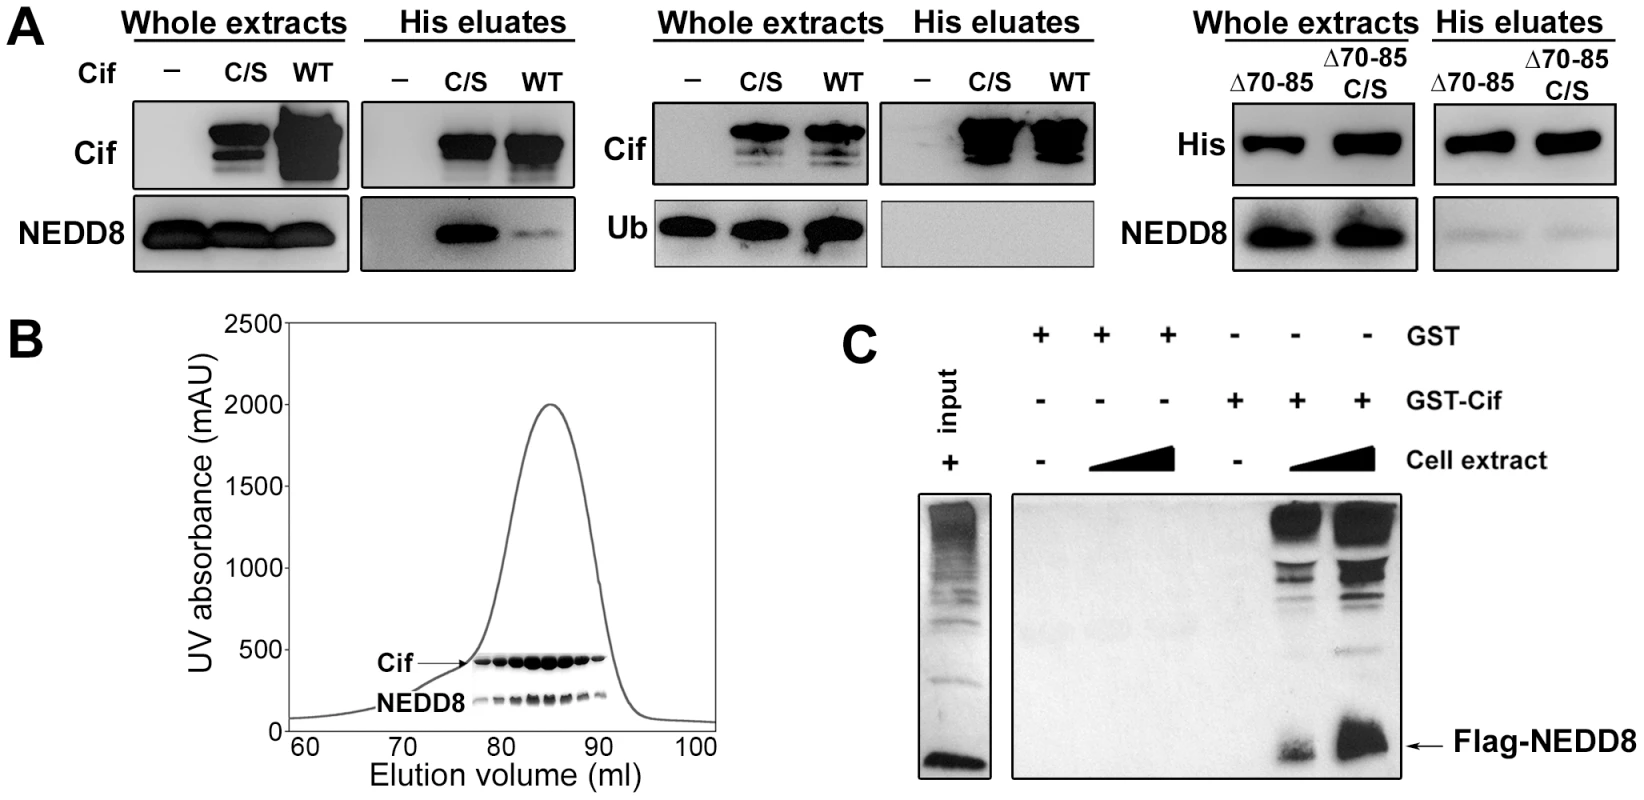 Cif interacts <i>in vitro</i> with the ubiquitin-like protein NEDD8.